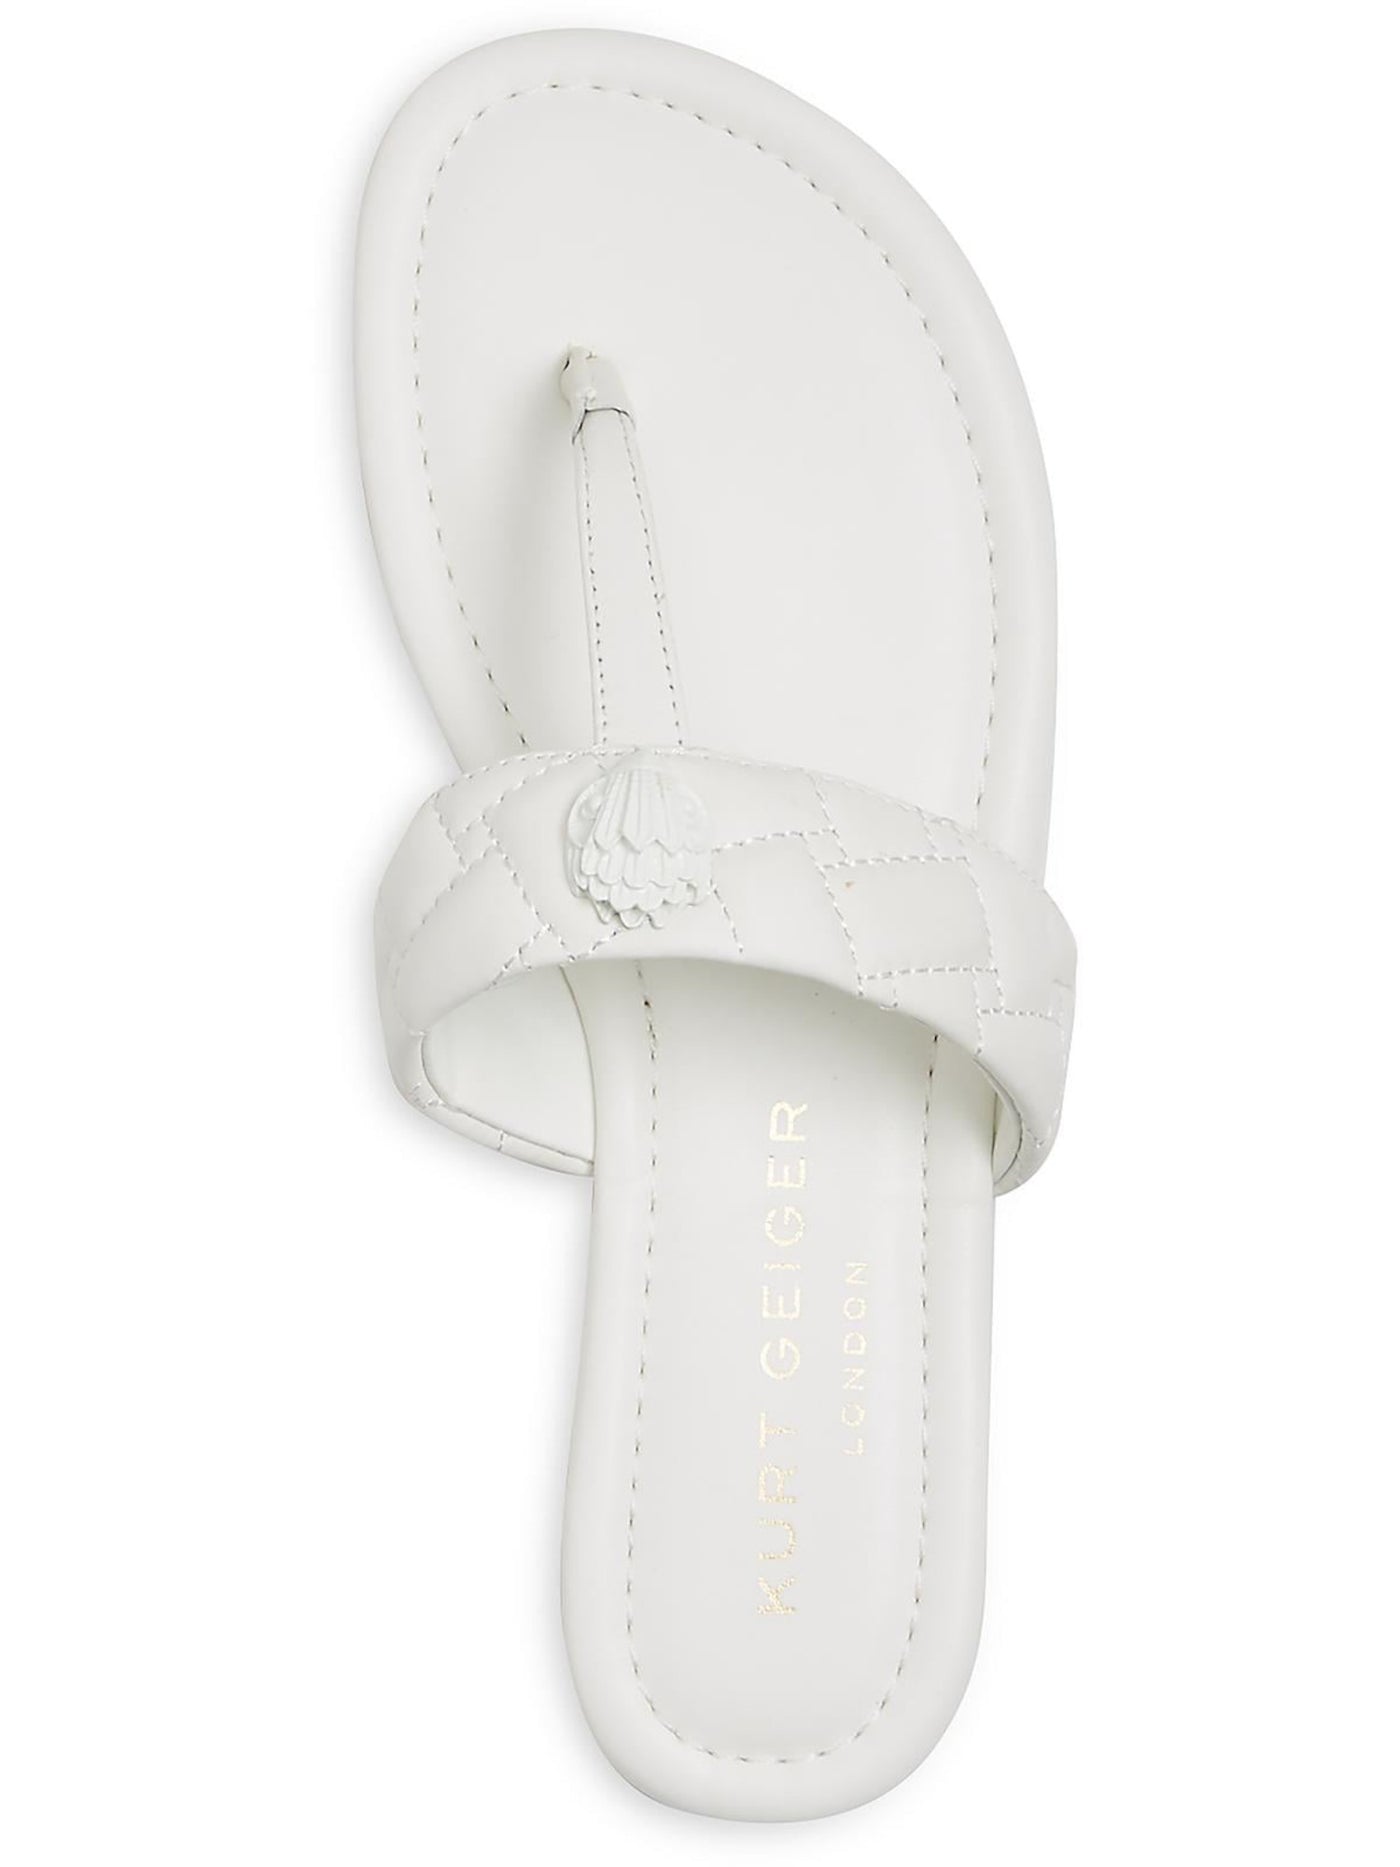 KURT GEIGER Womens White Quilted Padded Kensington T Bar Round Toe Slip On Leather Thong Sandals Shoes 42